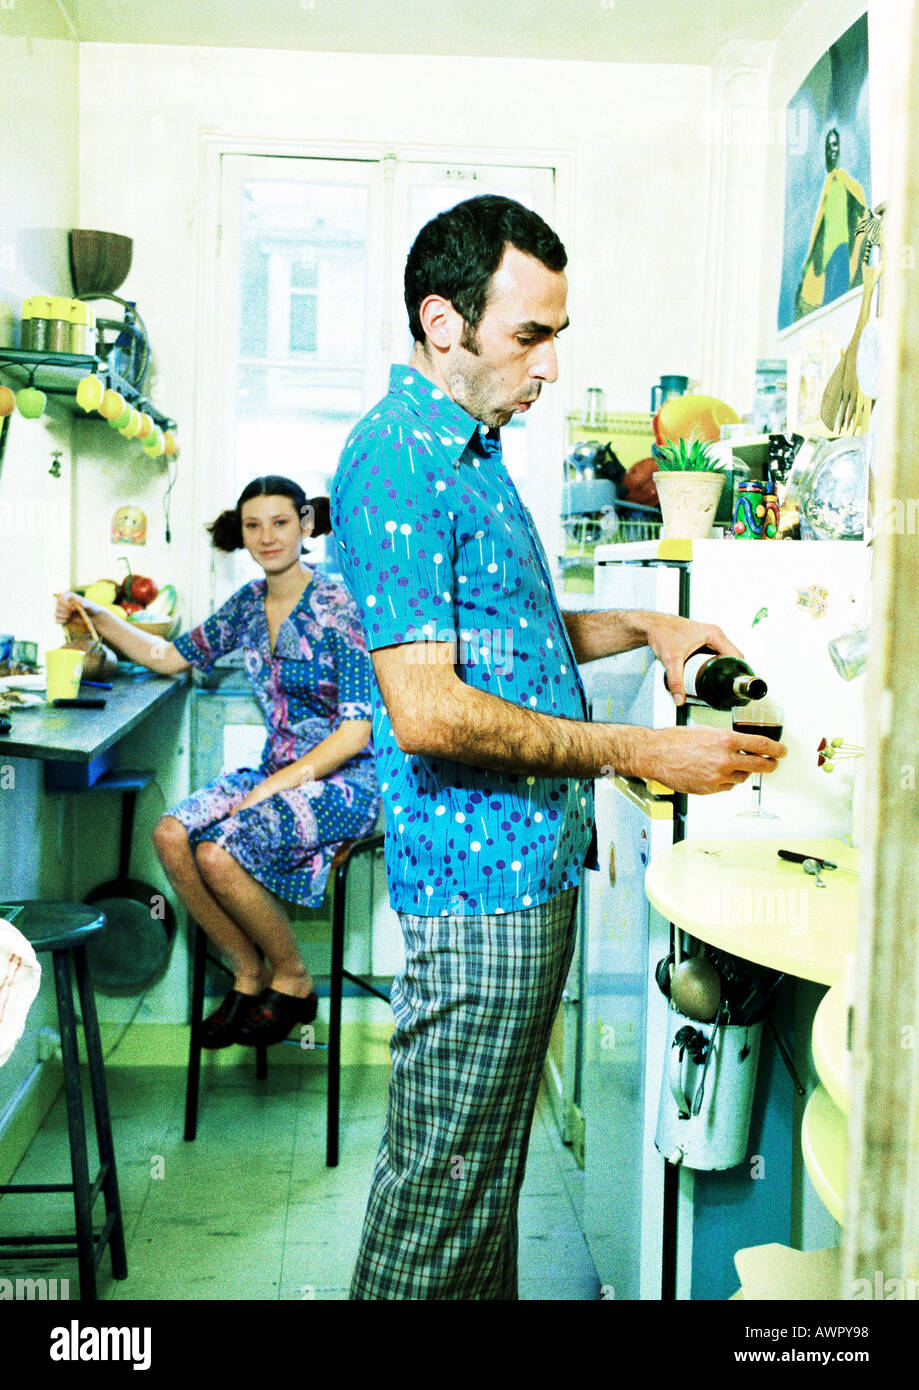 Couple in kitchen, woman sitting, man pouring wine. Stock Photo